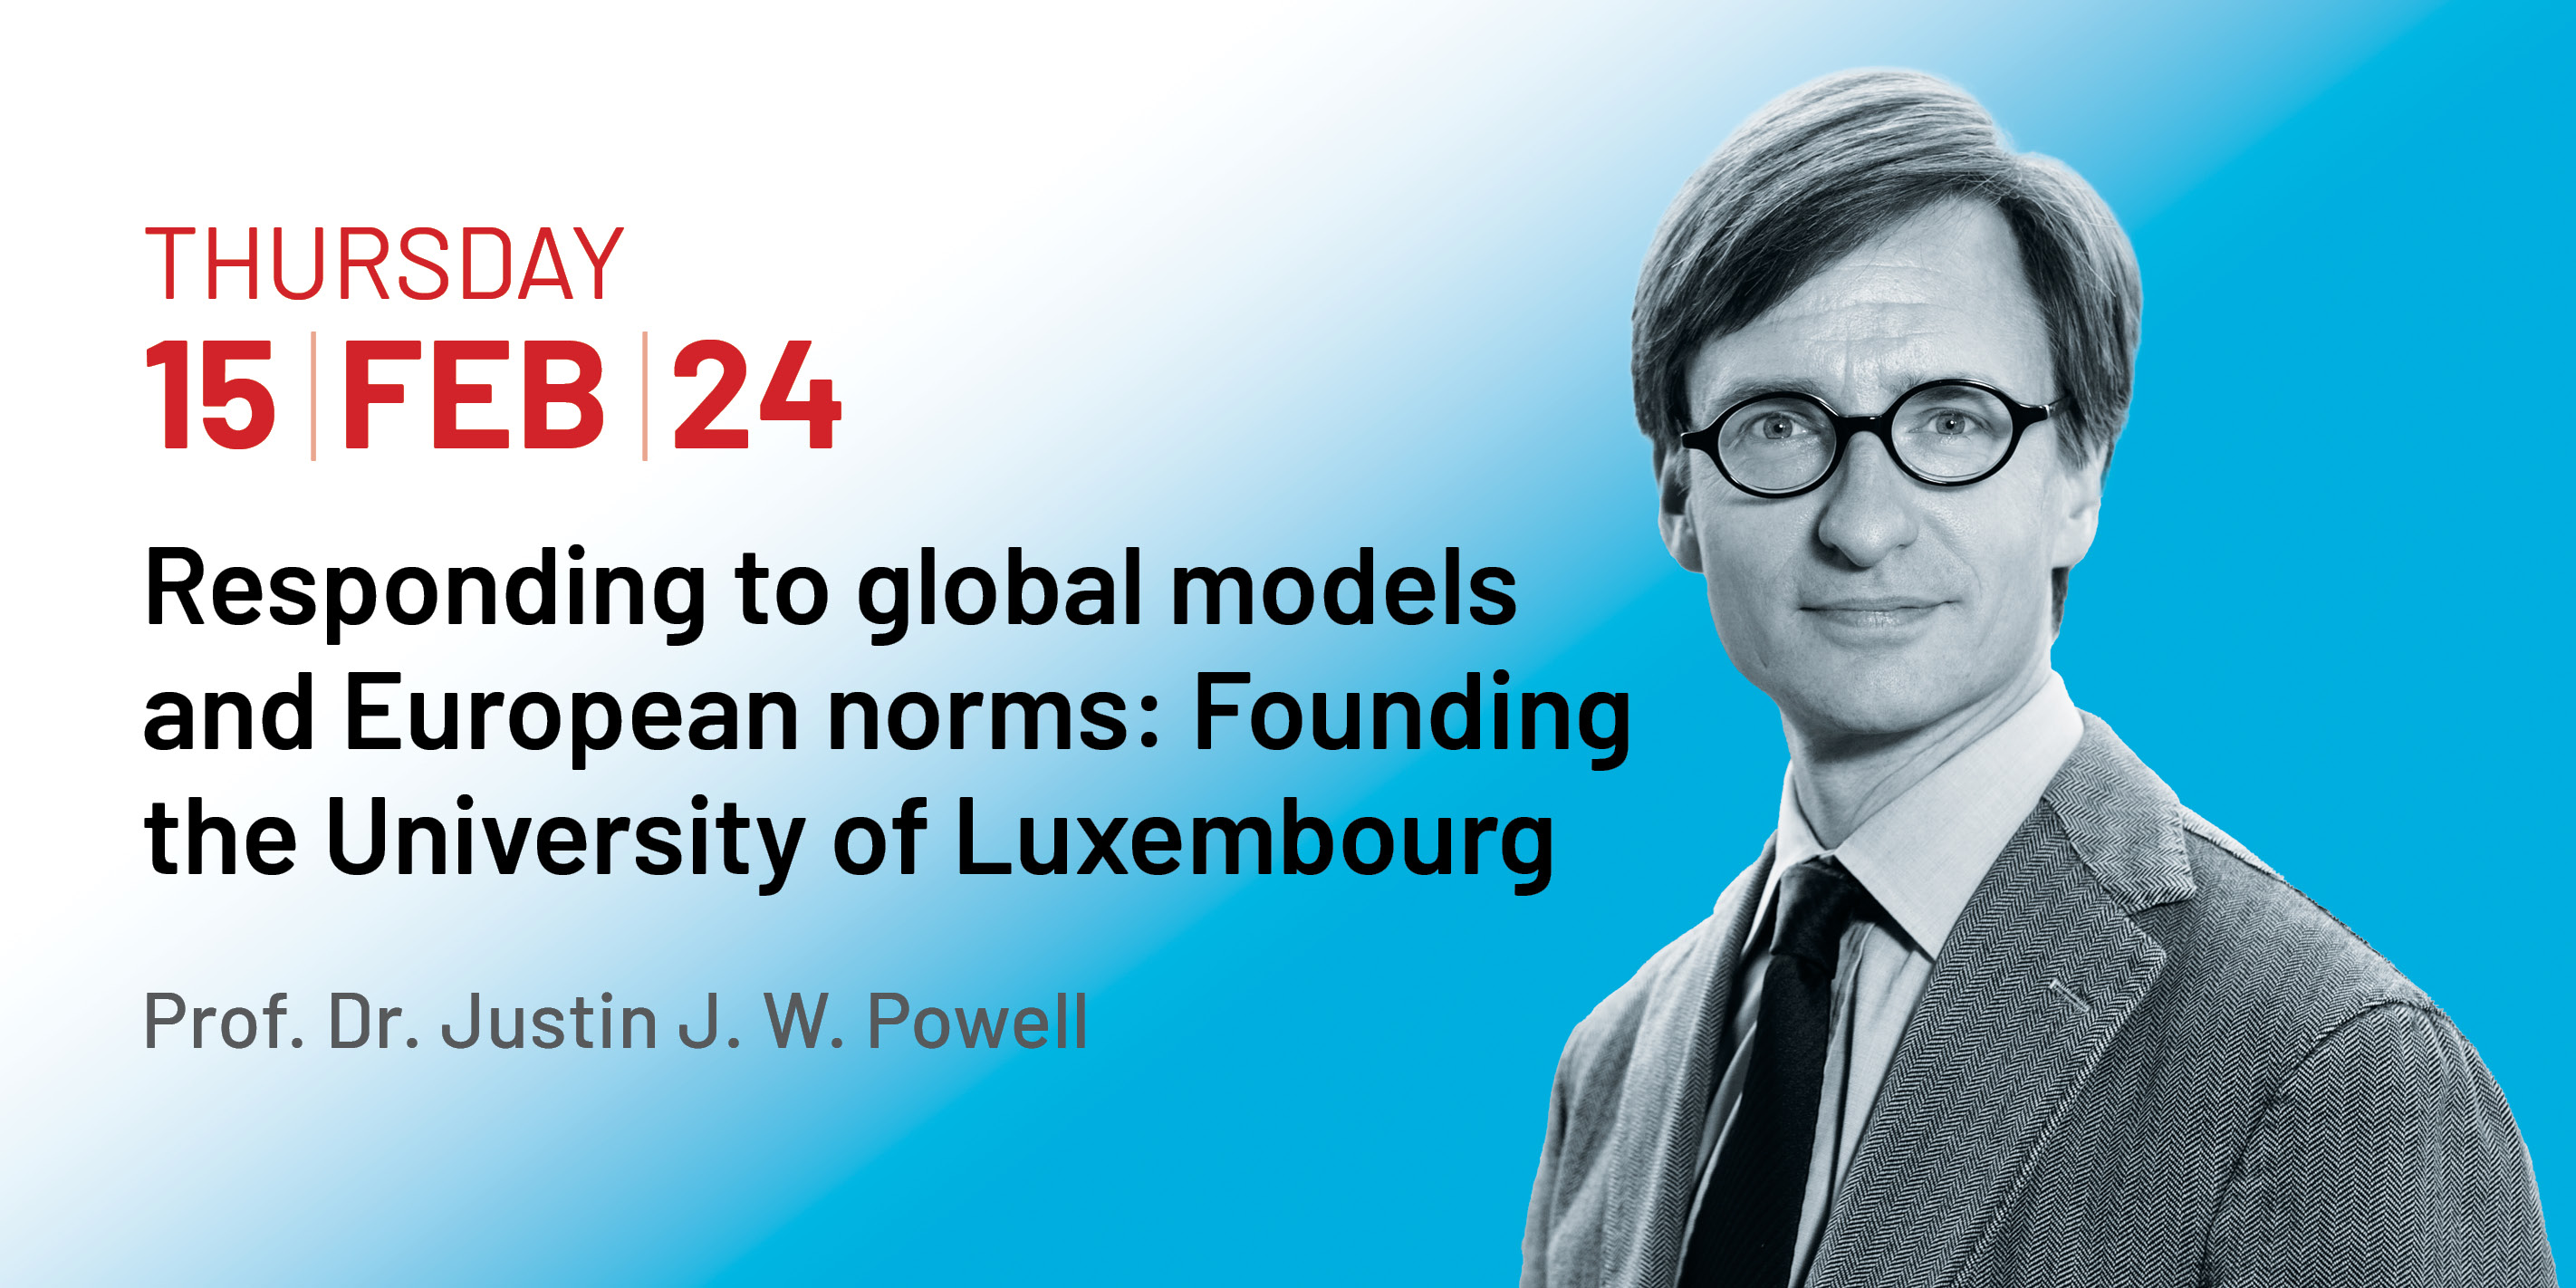 "Founding the University of Luxembourg" - Conférence en anglais